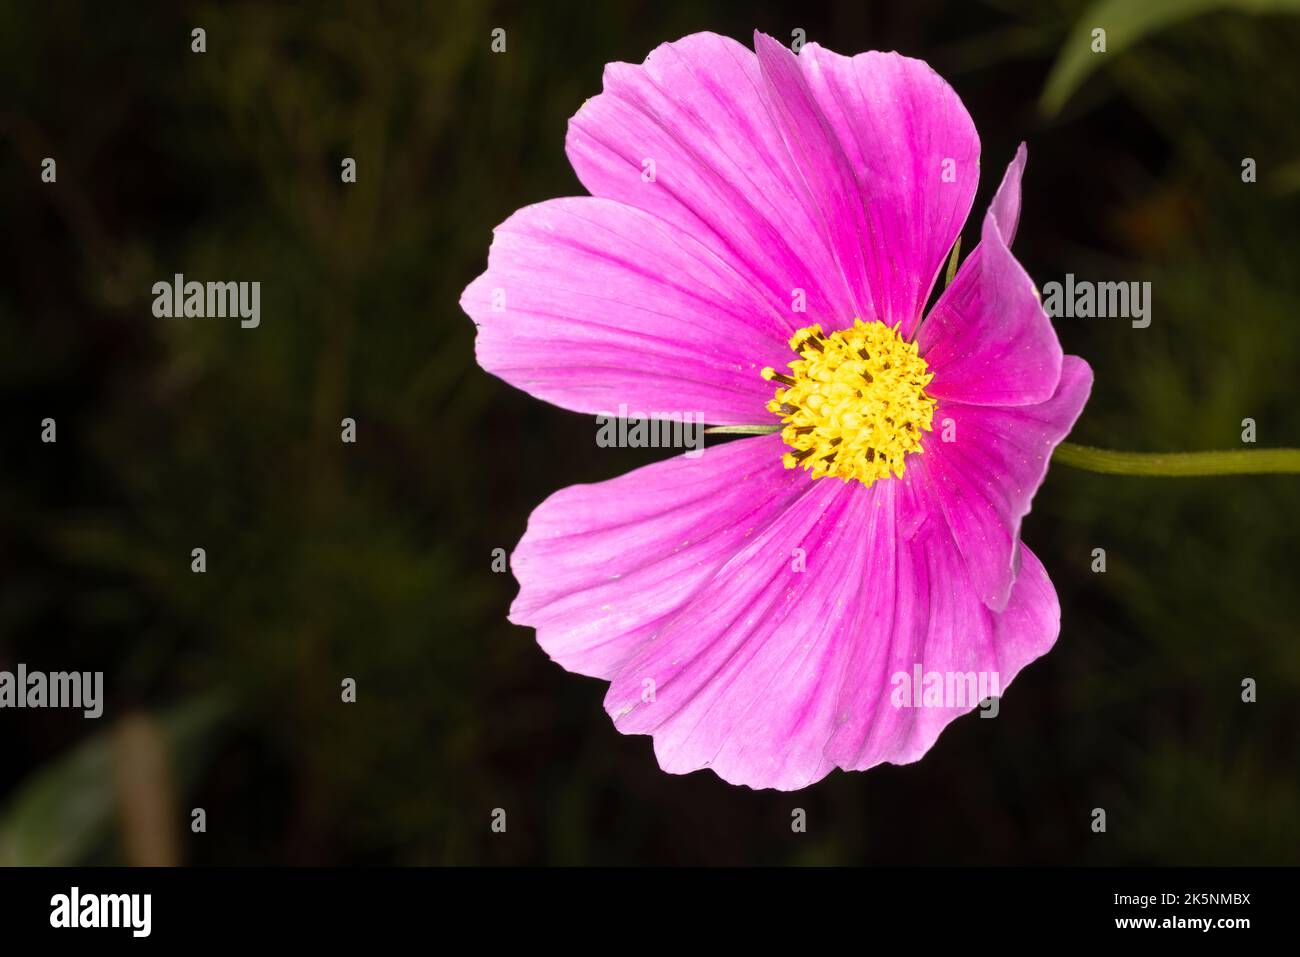 Beautiful gardern cosmos, a species of cosmos flower on the meadow. Pink flower on the green brurred background. Macro photo. Stock Photo